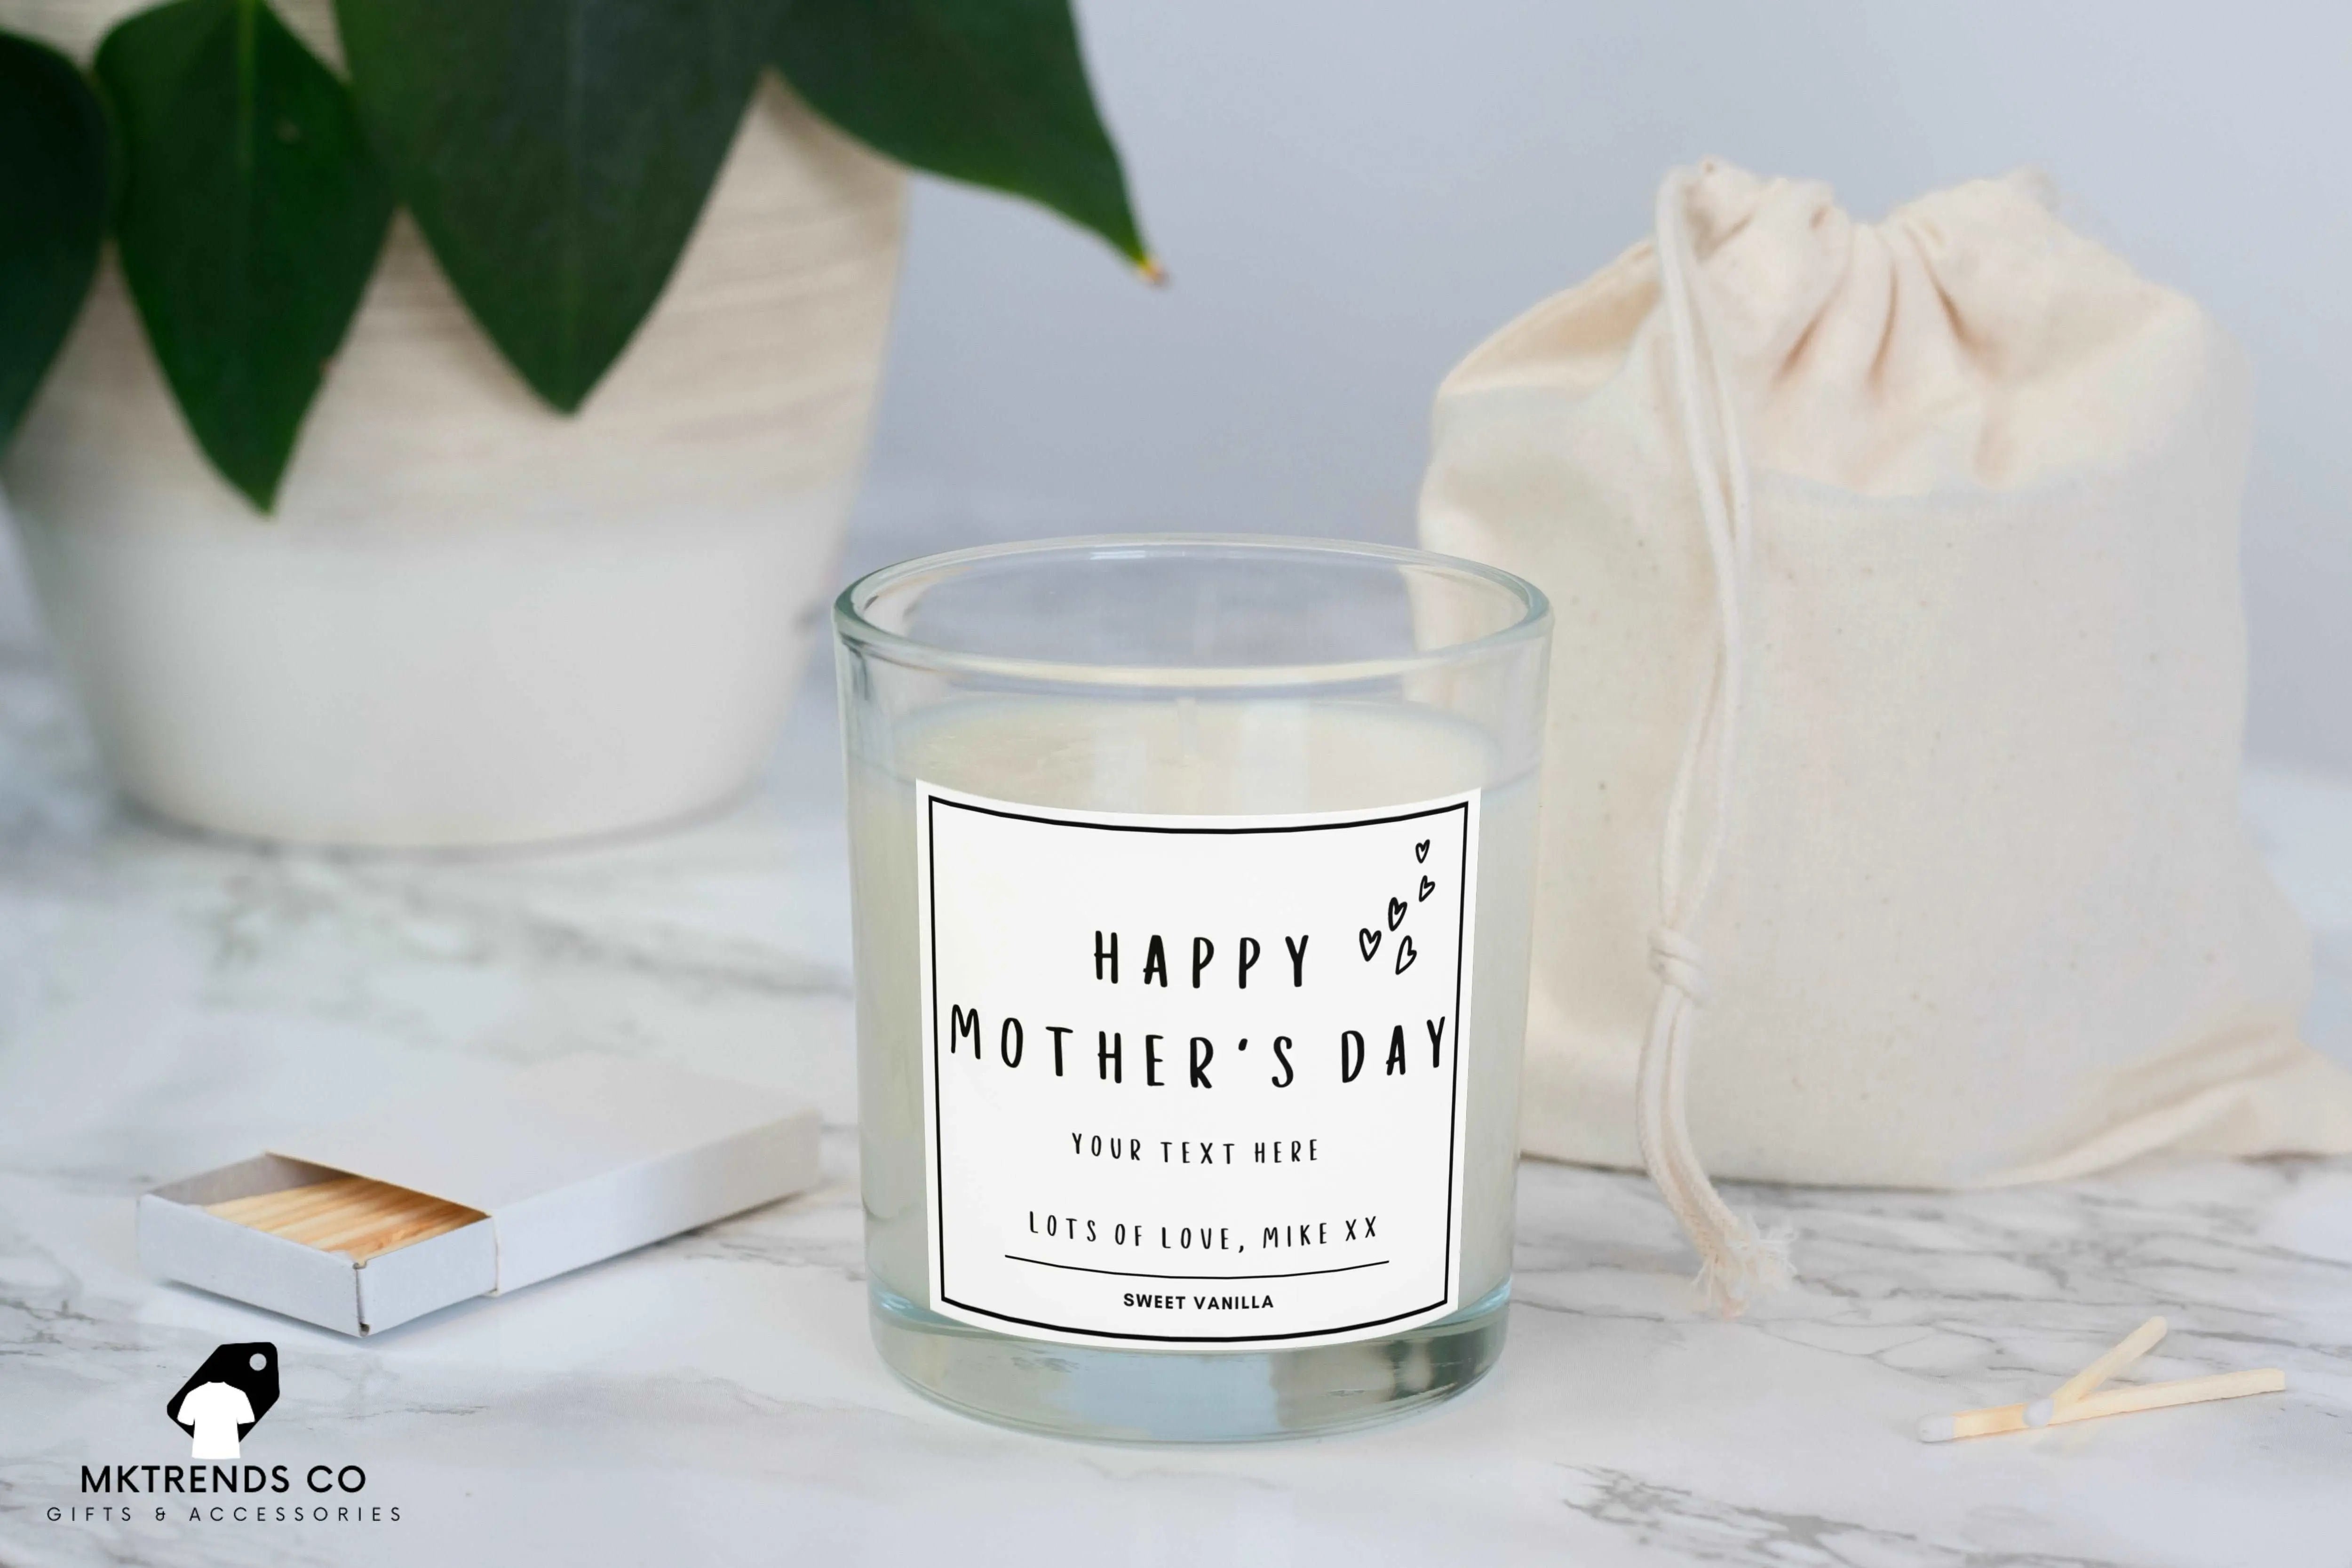 Creative and personalised ideas for Mother's Day gifts - Growing Family